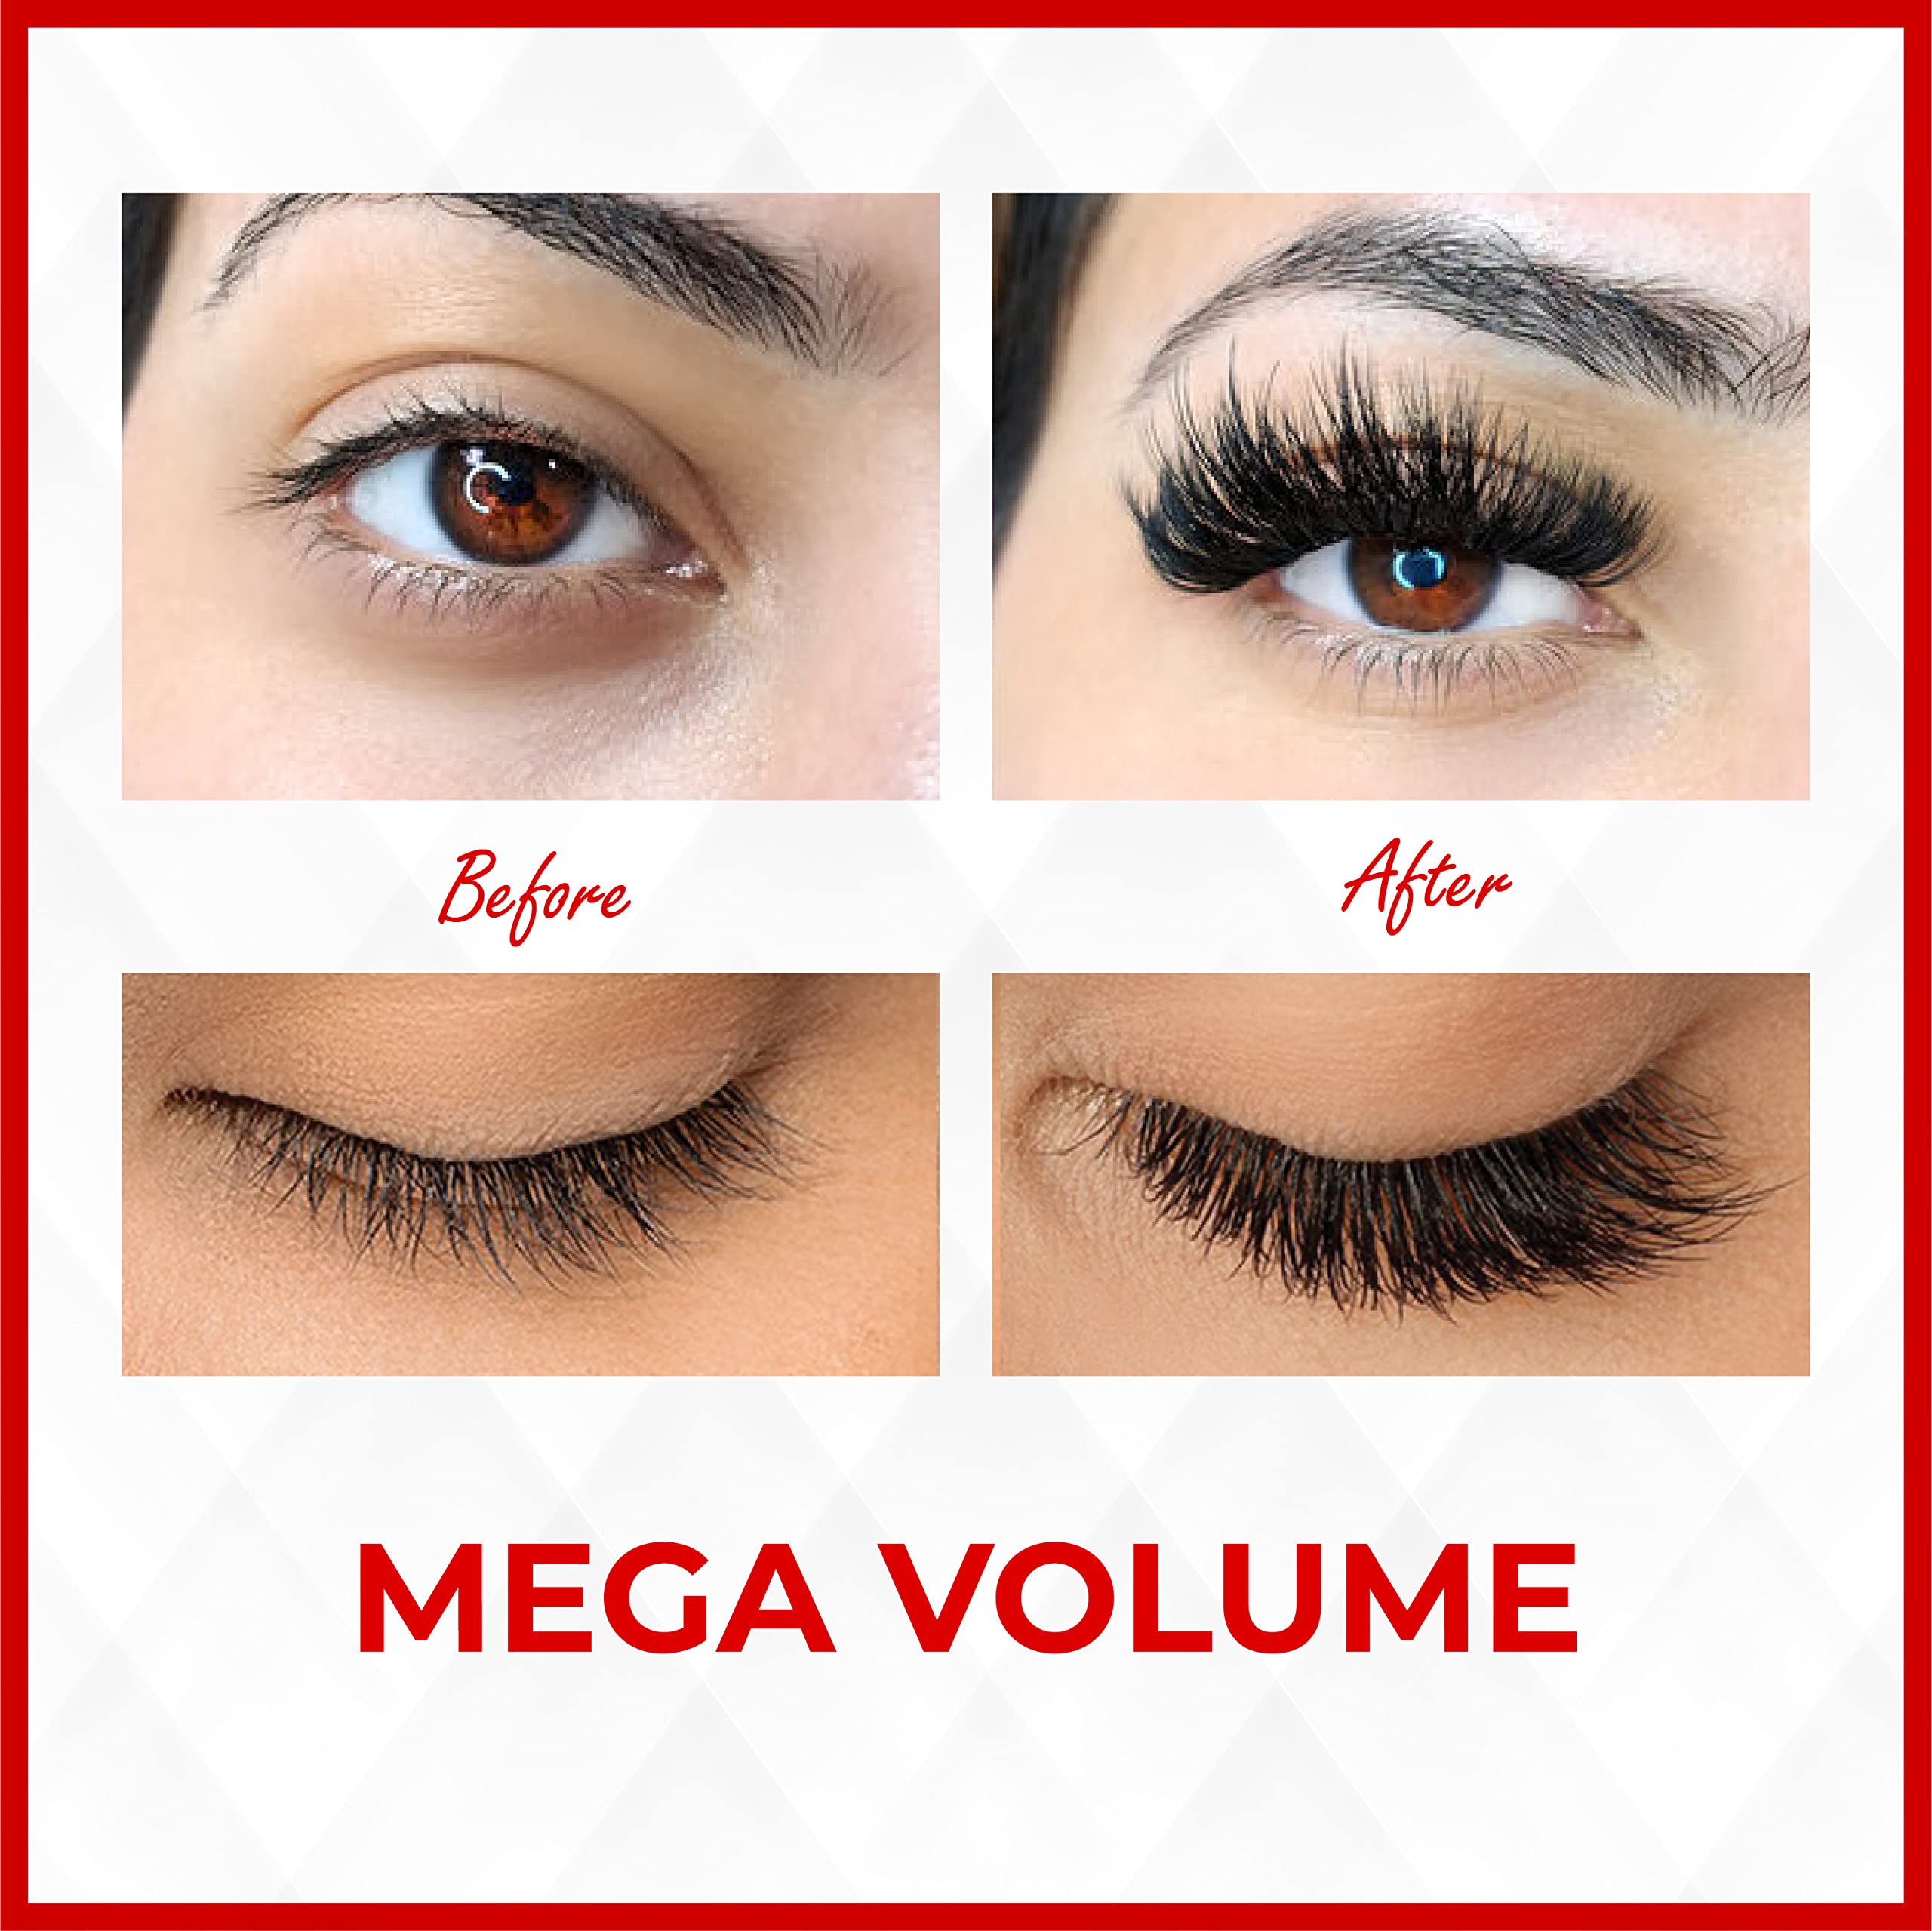 THE LASH SUPPLY 500 Fans, 20D Mega Volume Promade Fan, C/D Curl, Mix Length 12-16mm, 0.03 Thickness, Natural and Long-lasting Curl, Promade Loose Eyelash Extension Fans, Mixed Pack